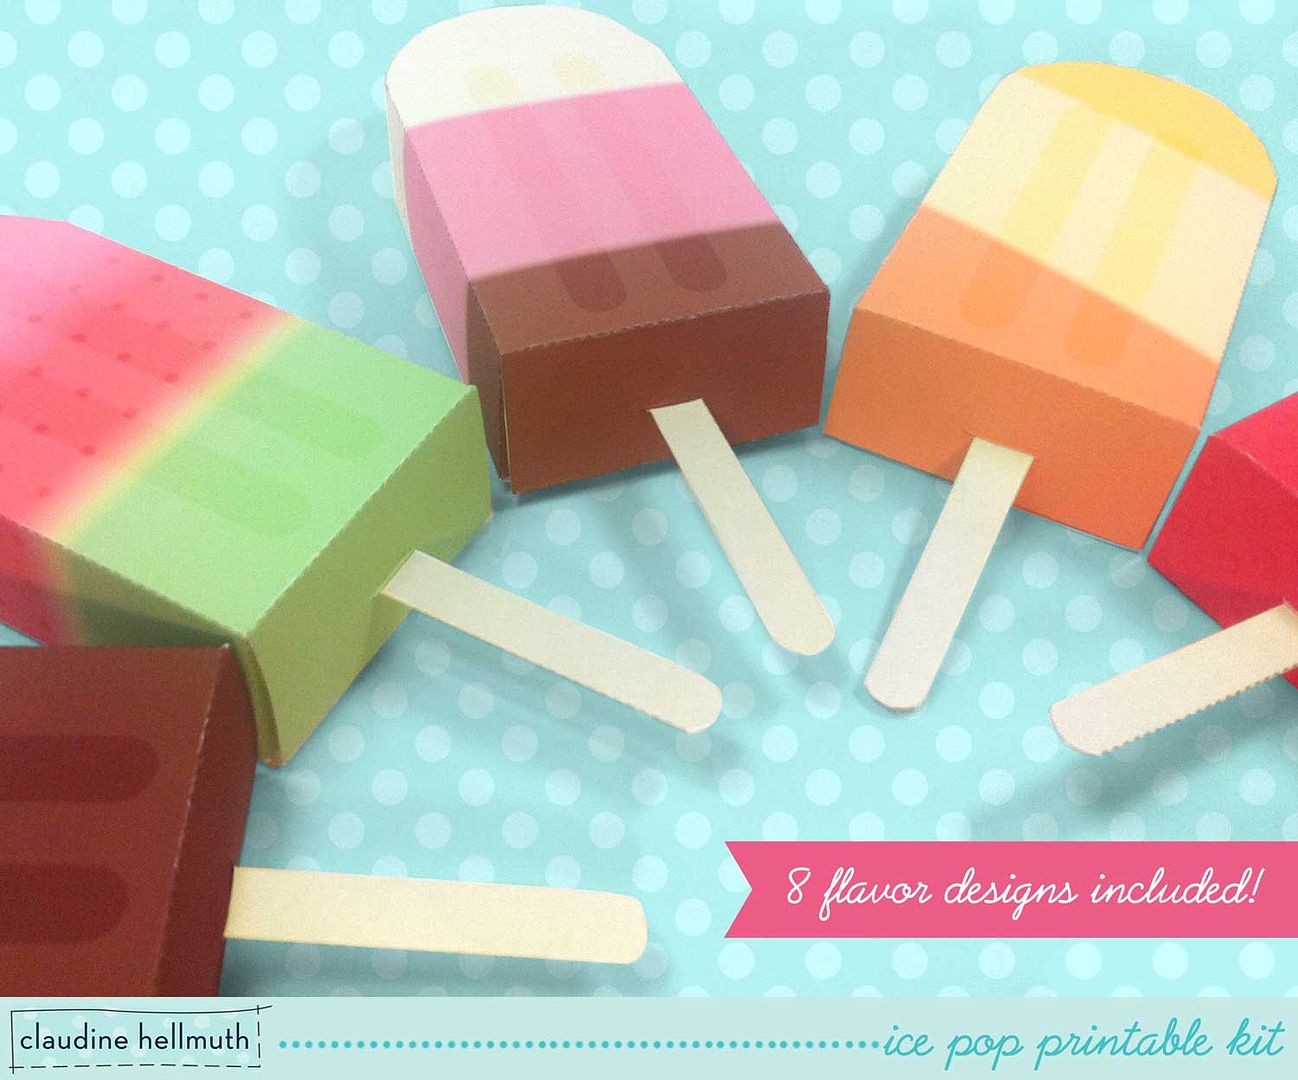 Printable teacher cards for food gifts: Printable popsicle gift card holder by Claudine Helmuth